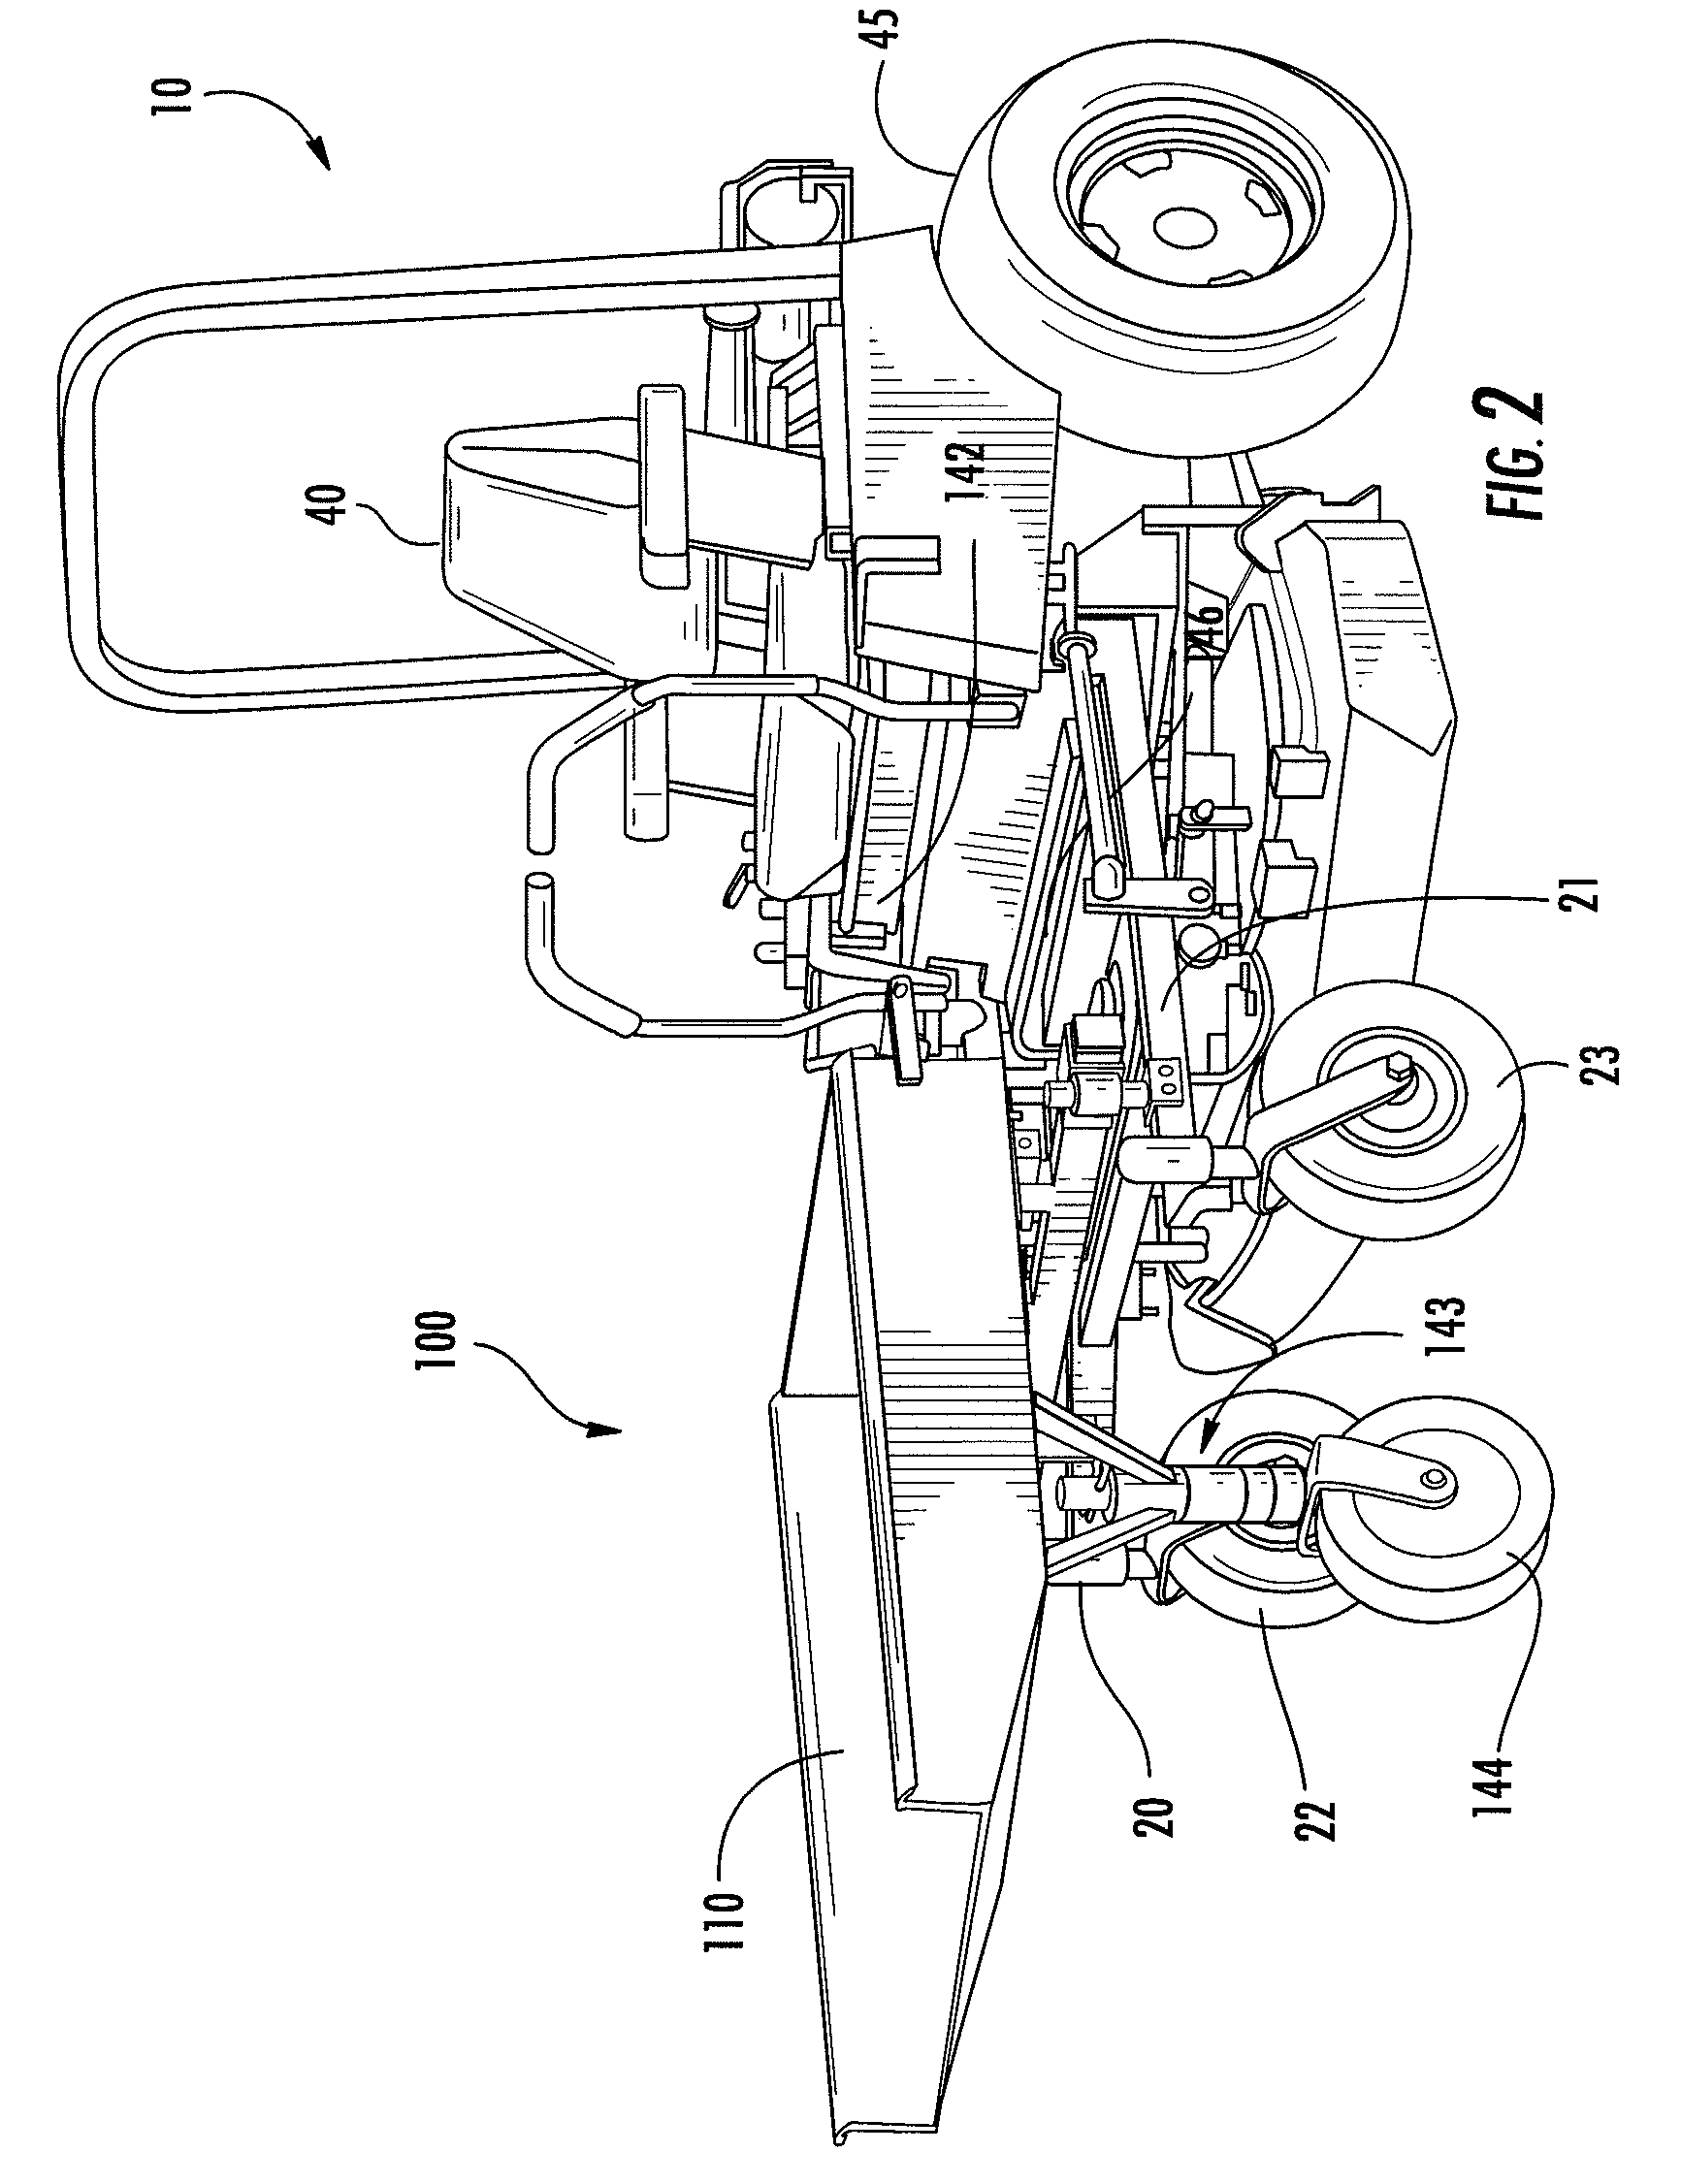 Mower payload bin and support structure